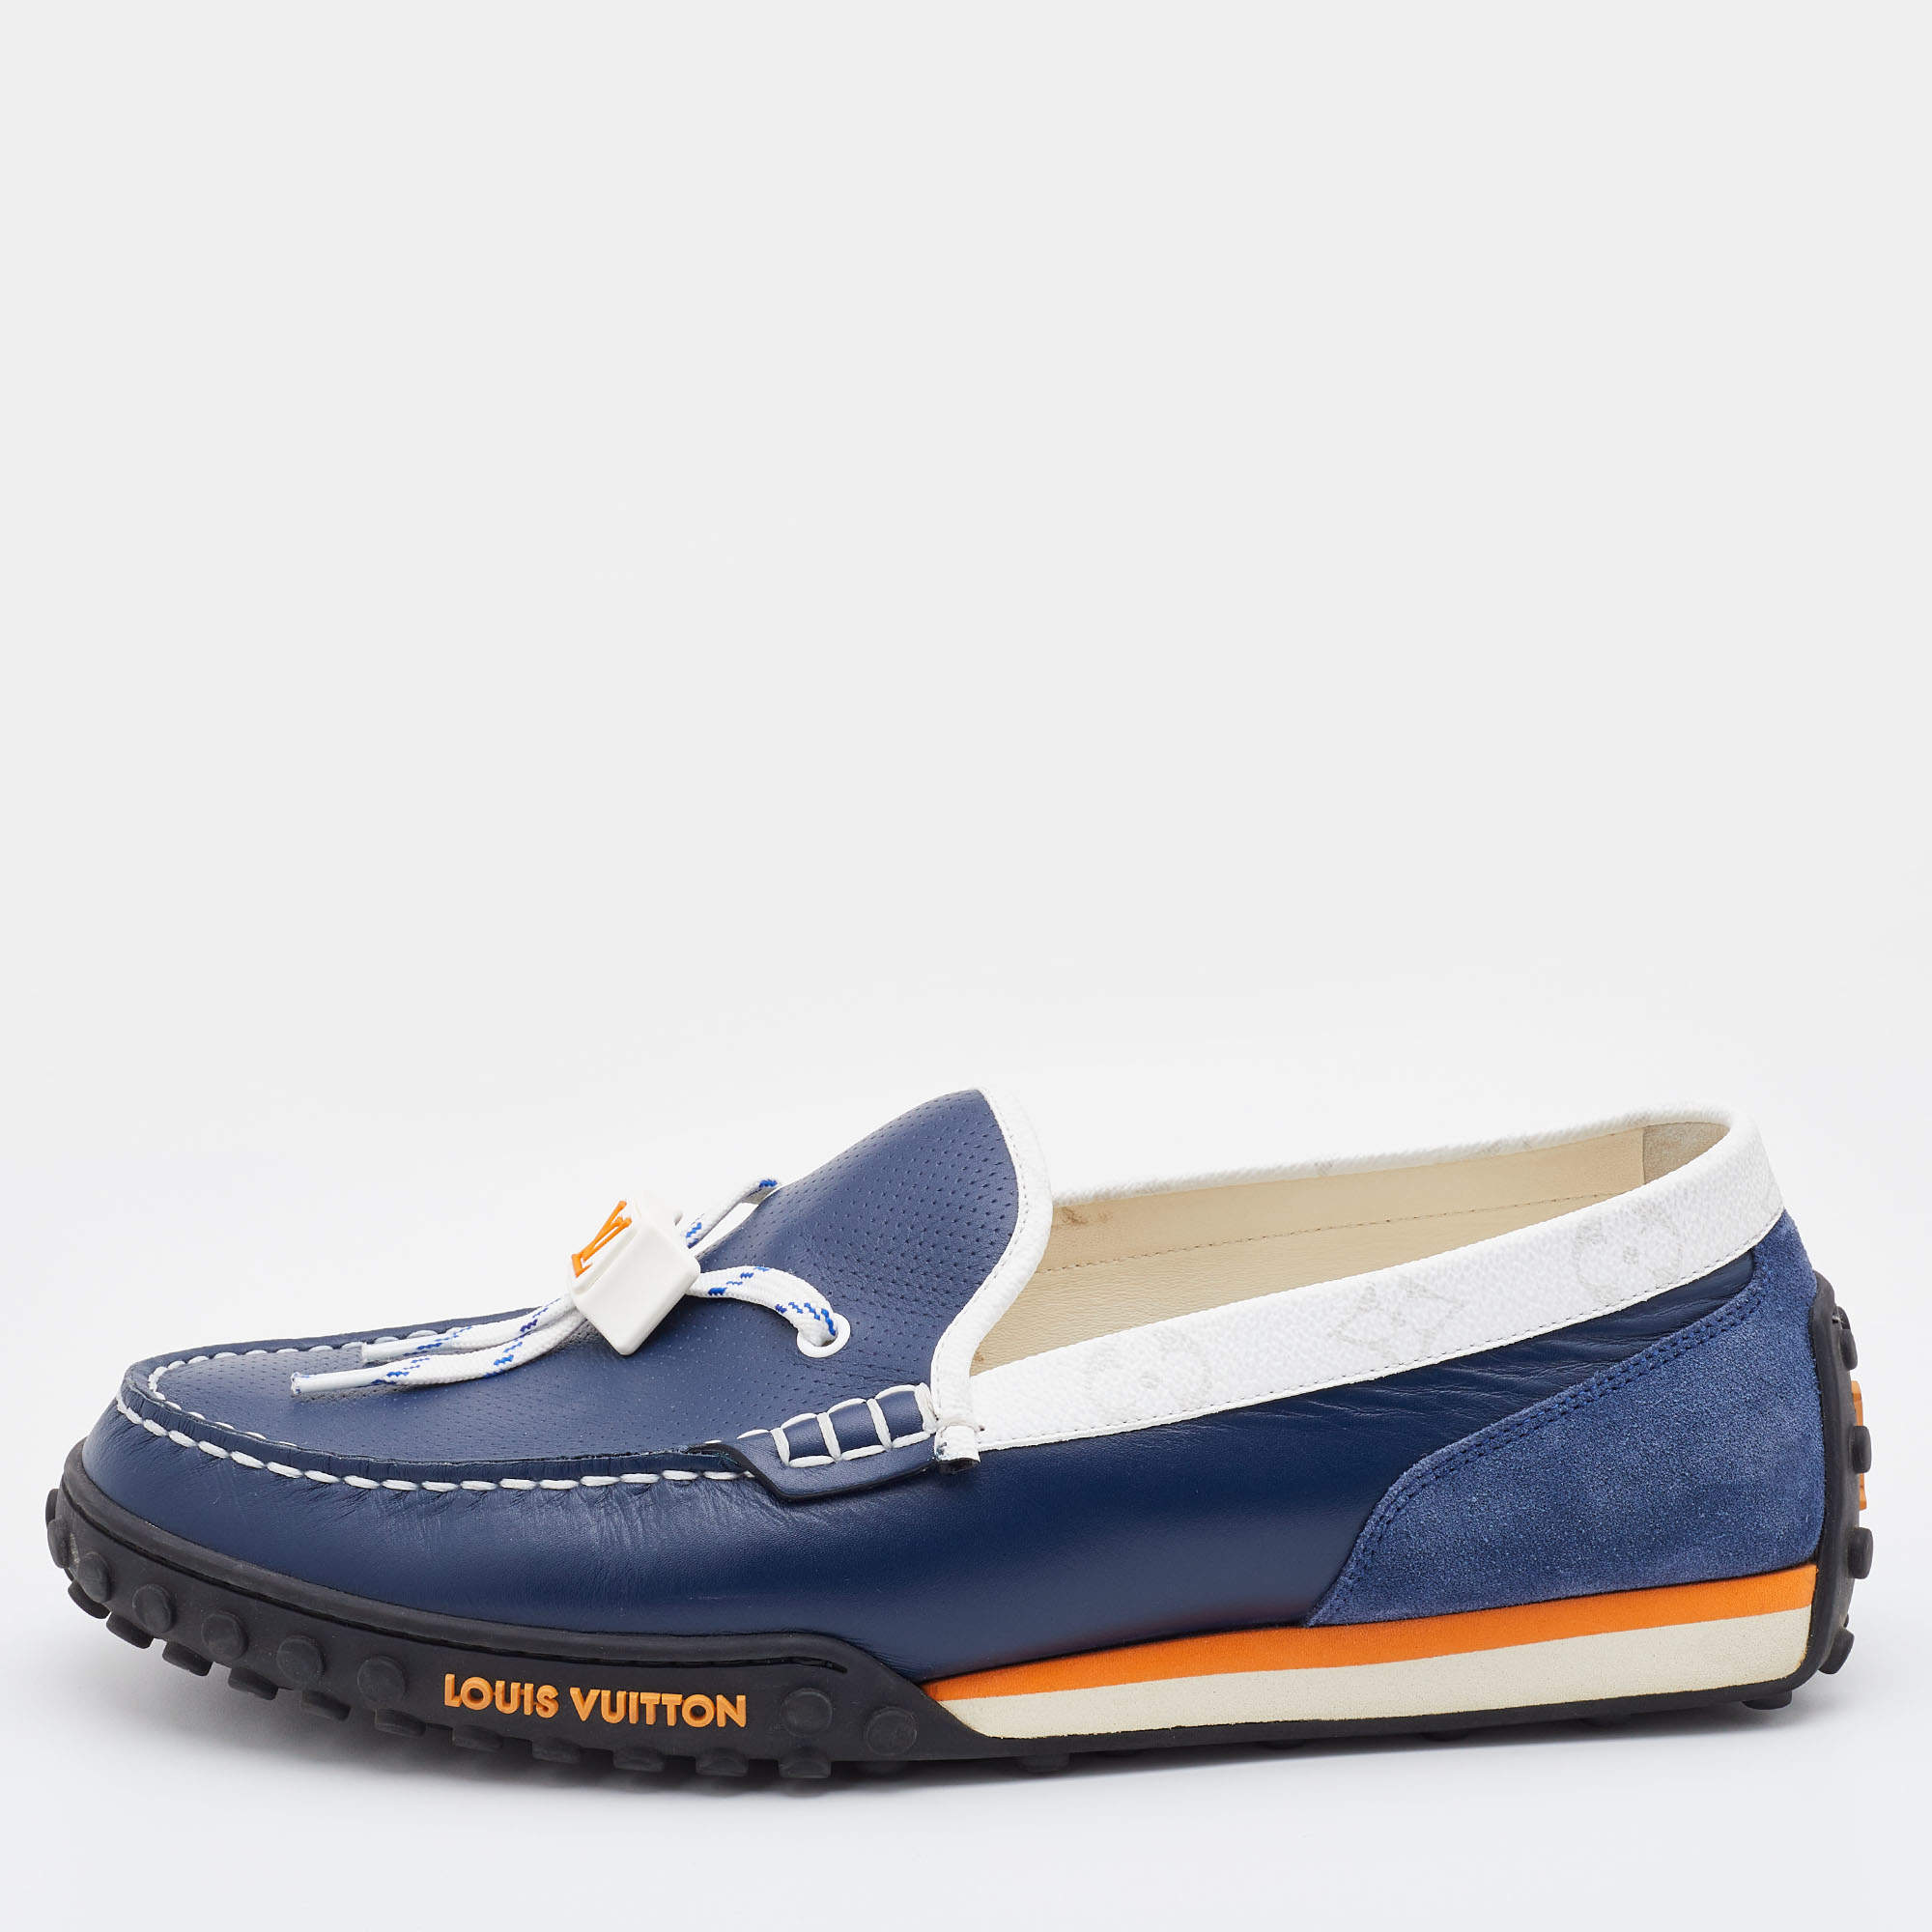 LV Racer Moccasins - Luxury Loafers and Moccasins - Shoes